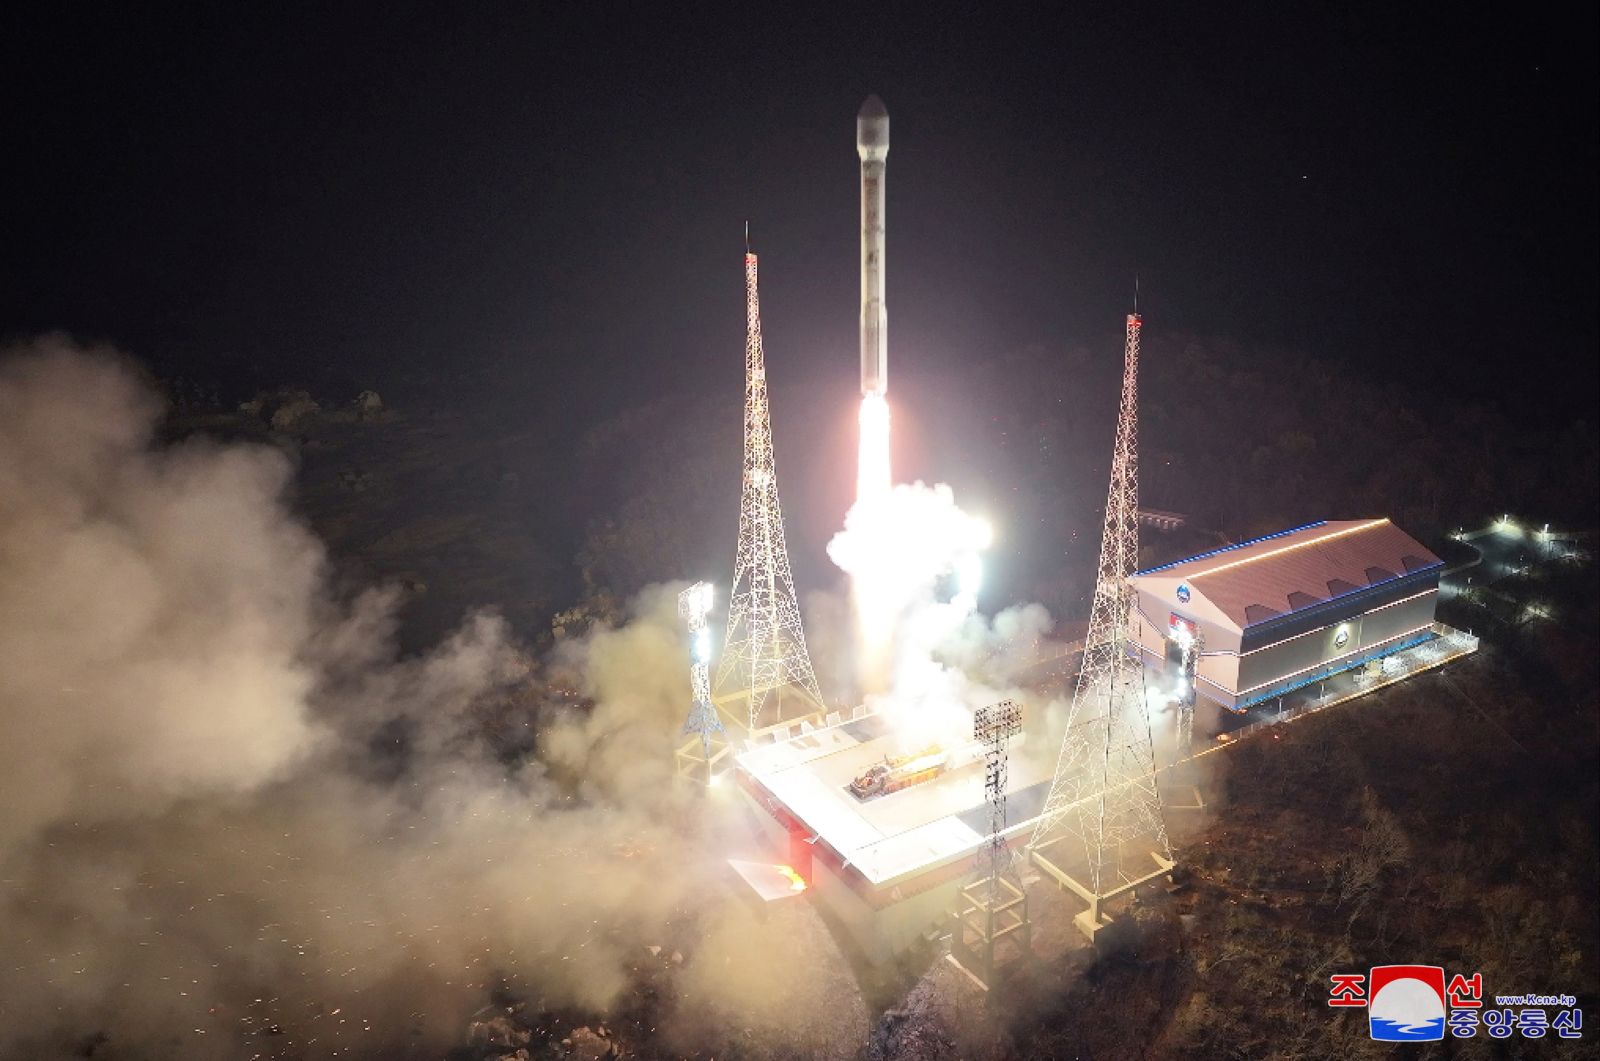 epa10988695 A photo released by the official North Korean Central News Agency (KCNA) on 22 November 2023 shows the launch of a new-type carrier rocket 'Chollima-1' carrying the reconnaissance satellite 'Malligyong-1' at the Sohae Satellite Launching Ground in Cholsan County, North Phyongan Province, North Korea, 21 November 2023. According to KCNA, North Korea's National Aerospace Technology Administration (NATA) has successfully launched the carrier rocket 'Chollima-1' and 'accurately put the reconnaissance satellite 'Malligyong-1' on its orbit at 22:54:13, 705s after the launch'.  EPA/KCNA   EDITORIAL USE ONLY  EDITORIAL USE ONLY